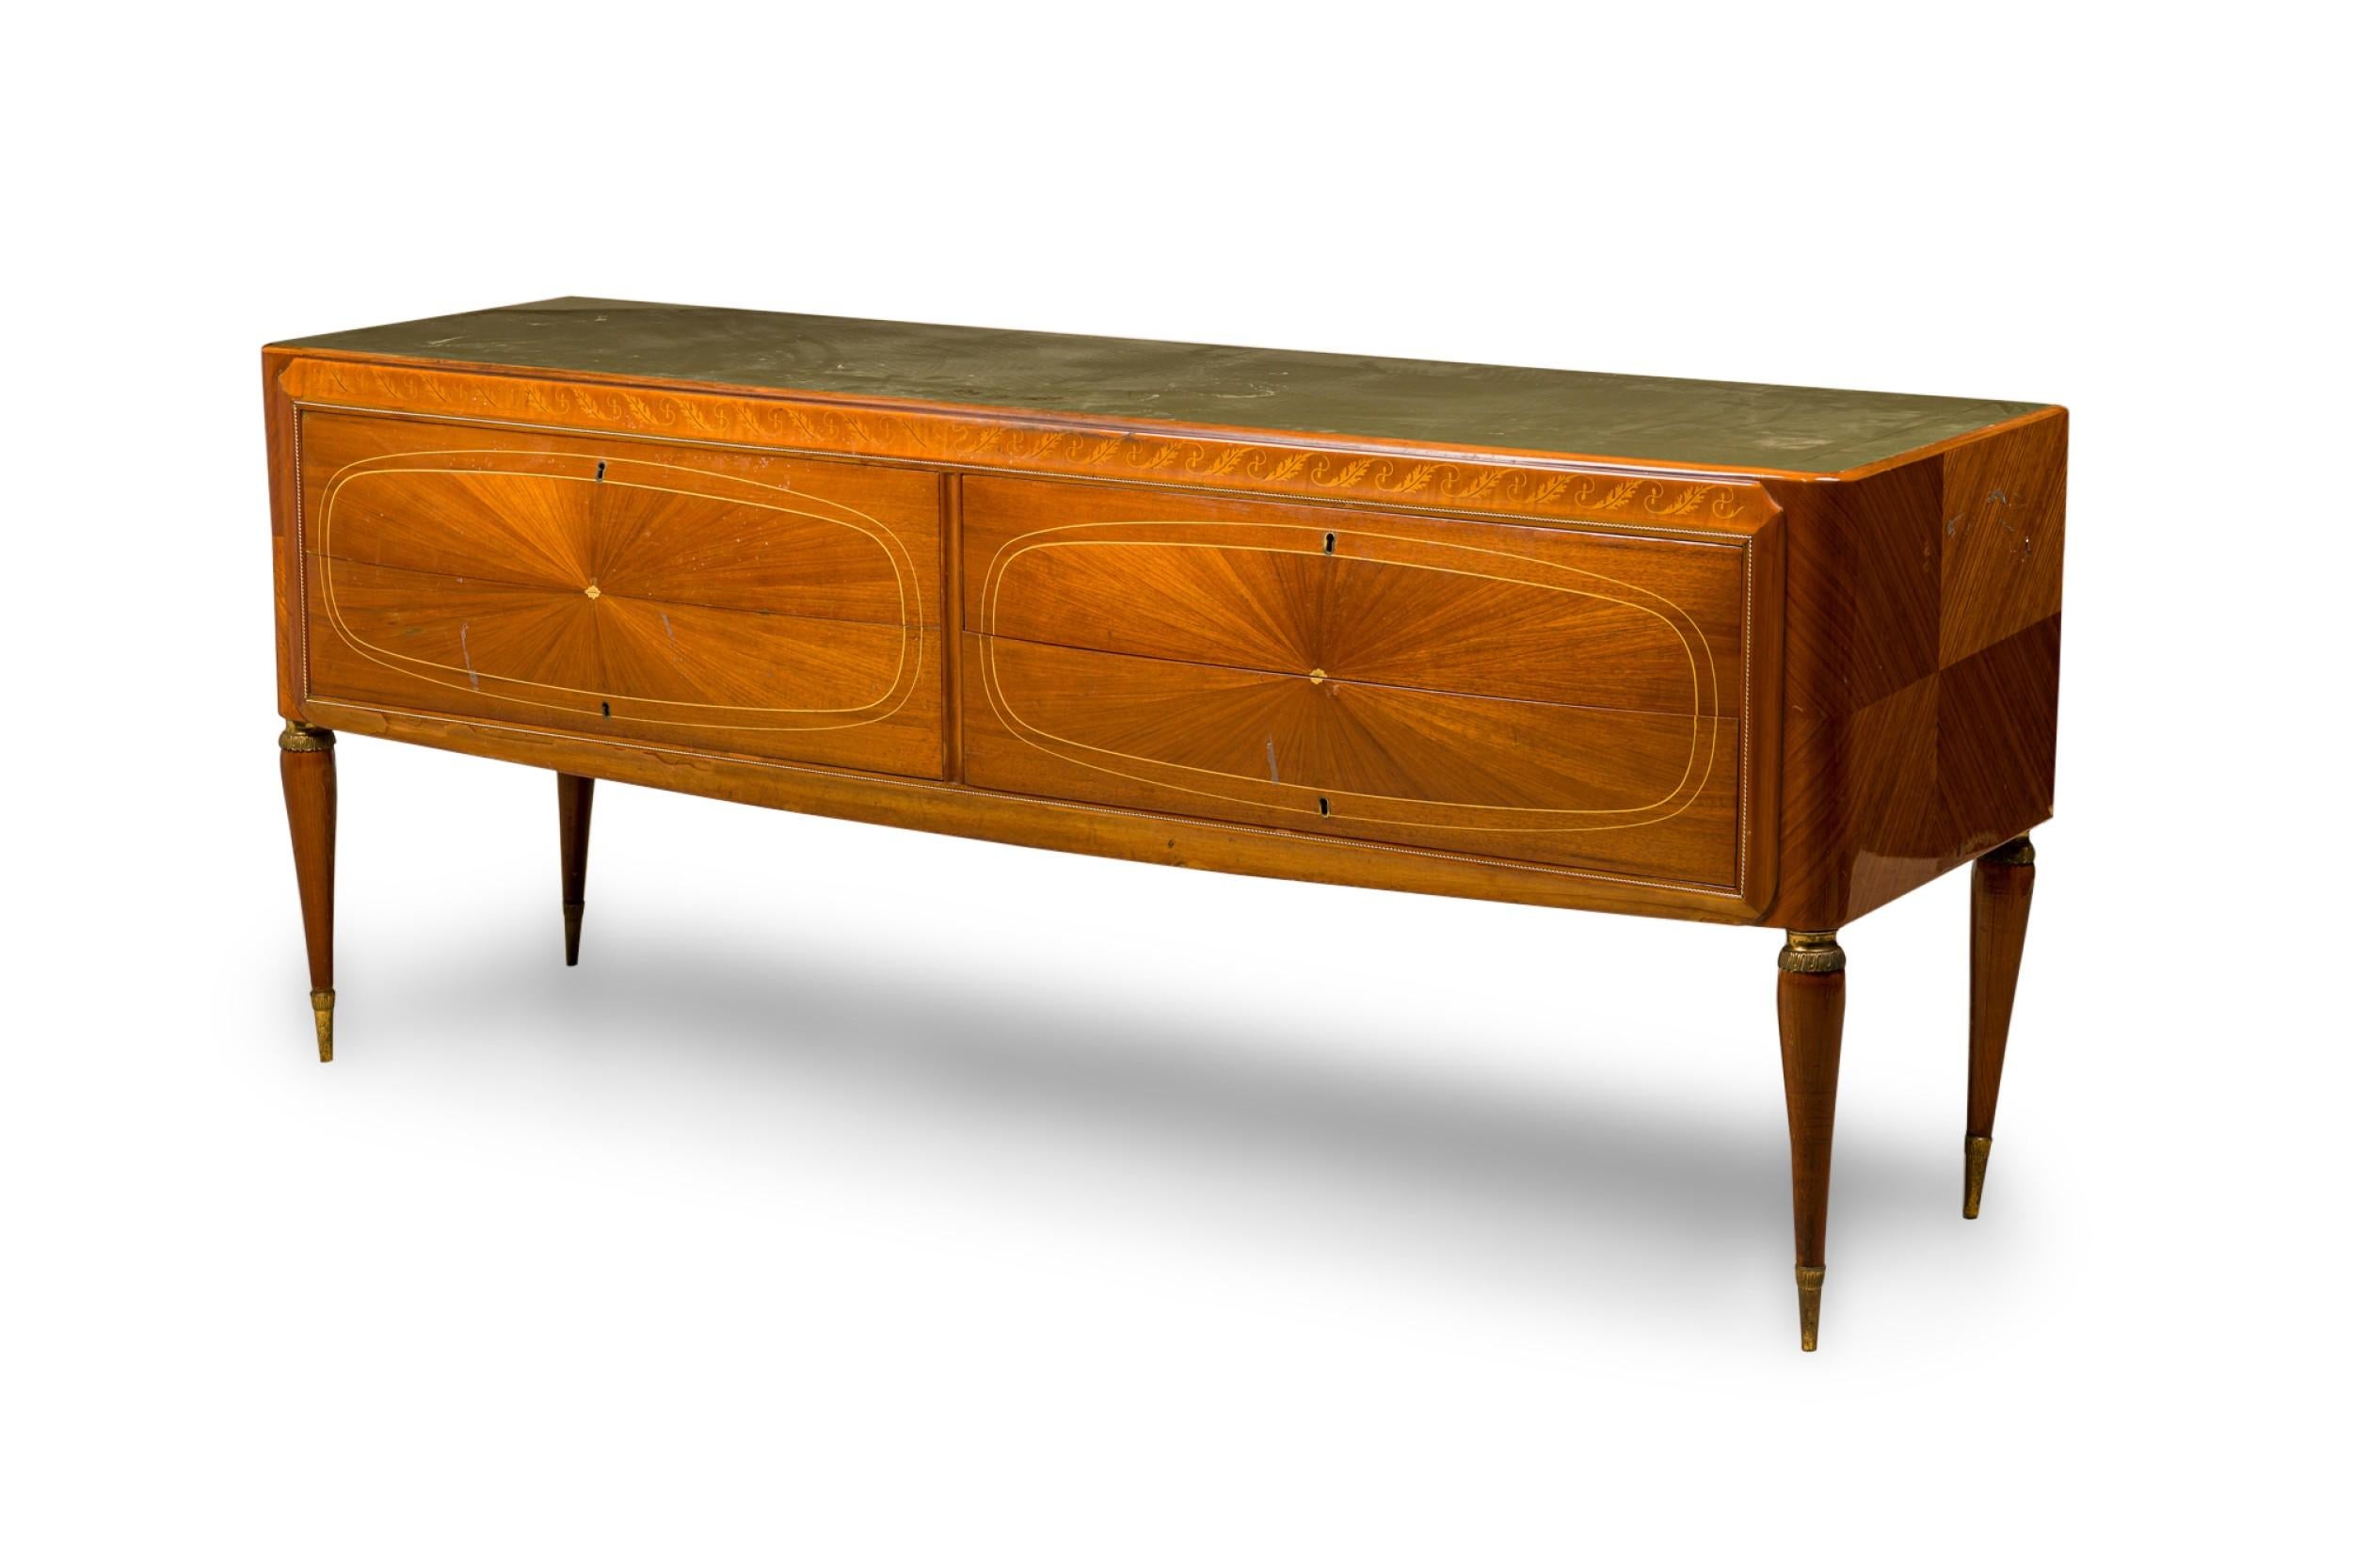 Italian Mid-Century Modern (1950s) mahogany and fruitwood sideboard / buffet with four drawers inside a fine twisted brass inlaid border, with oval inlaid designs, resting on four tapered legs. (VITTORIO DASSI)
 

 Significant wear to